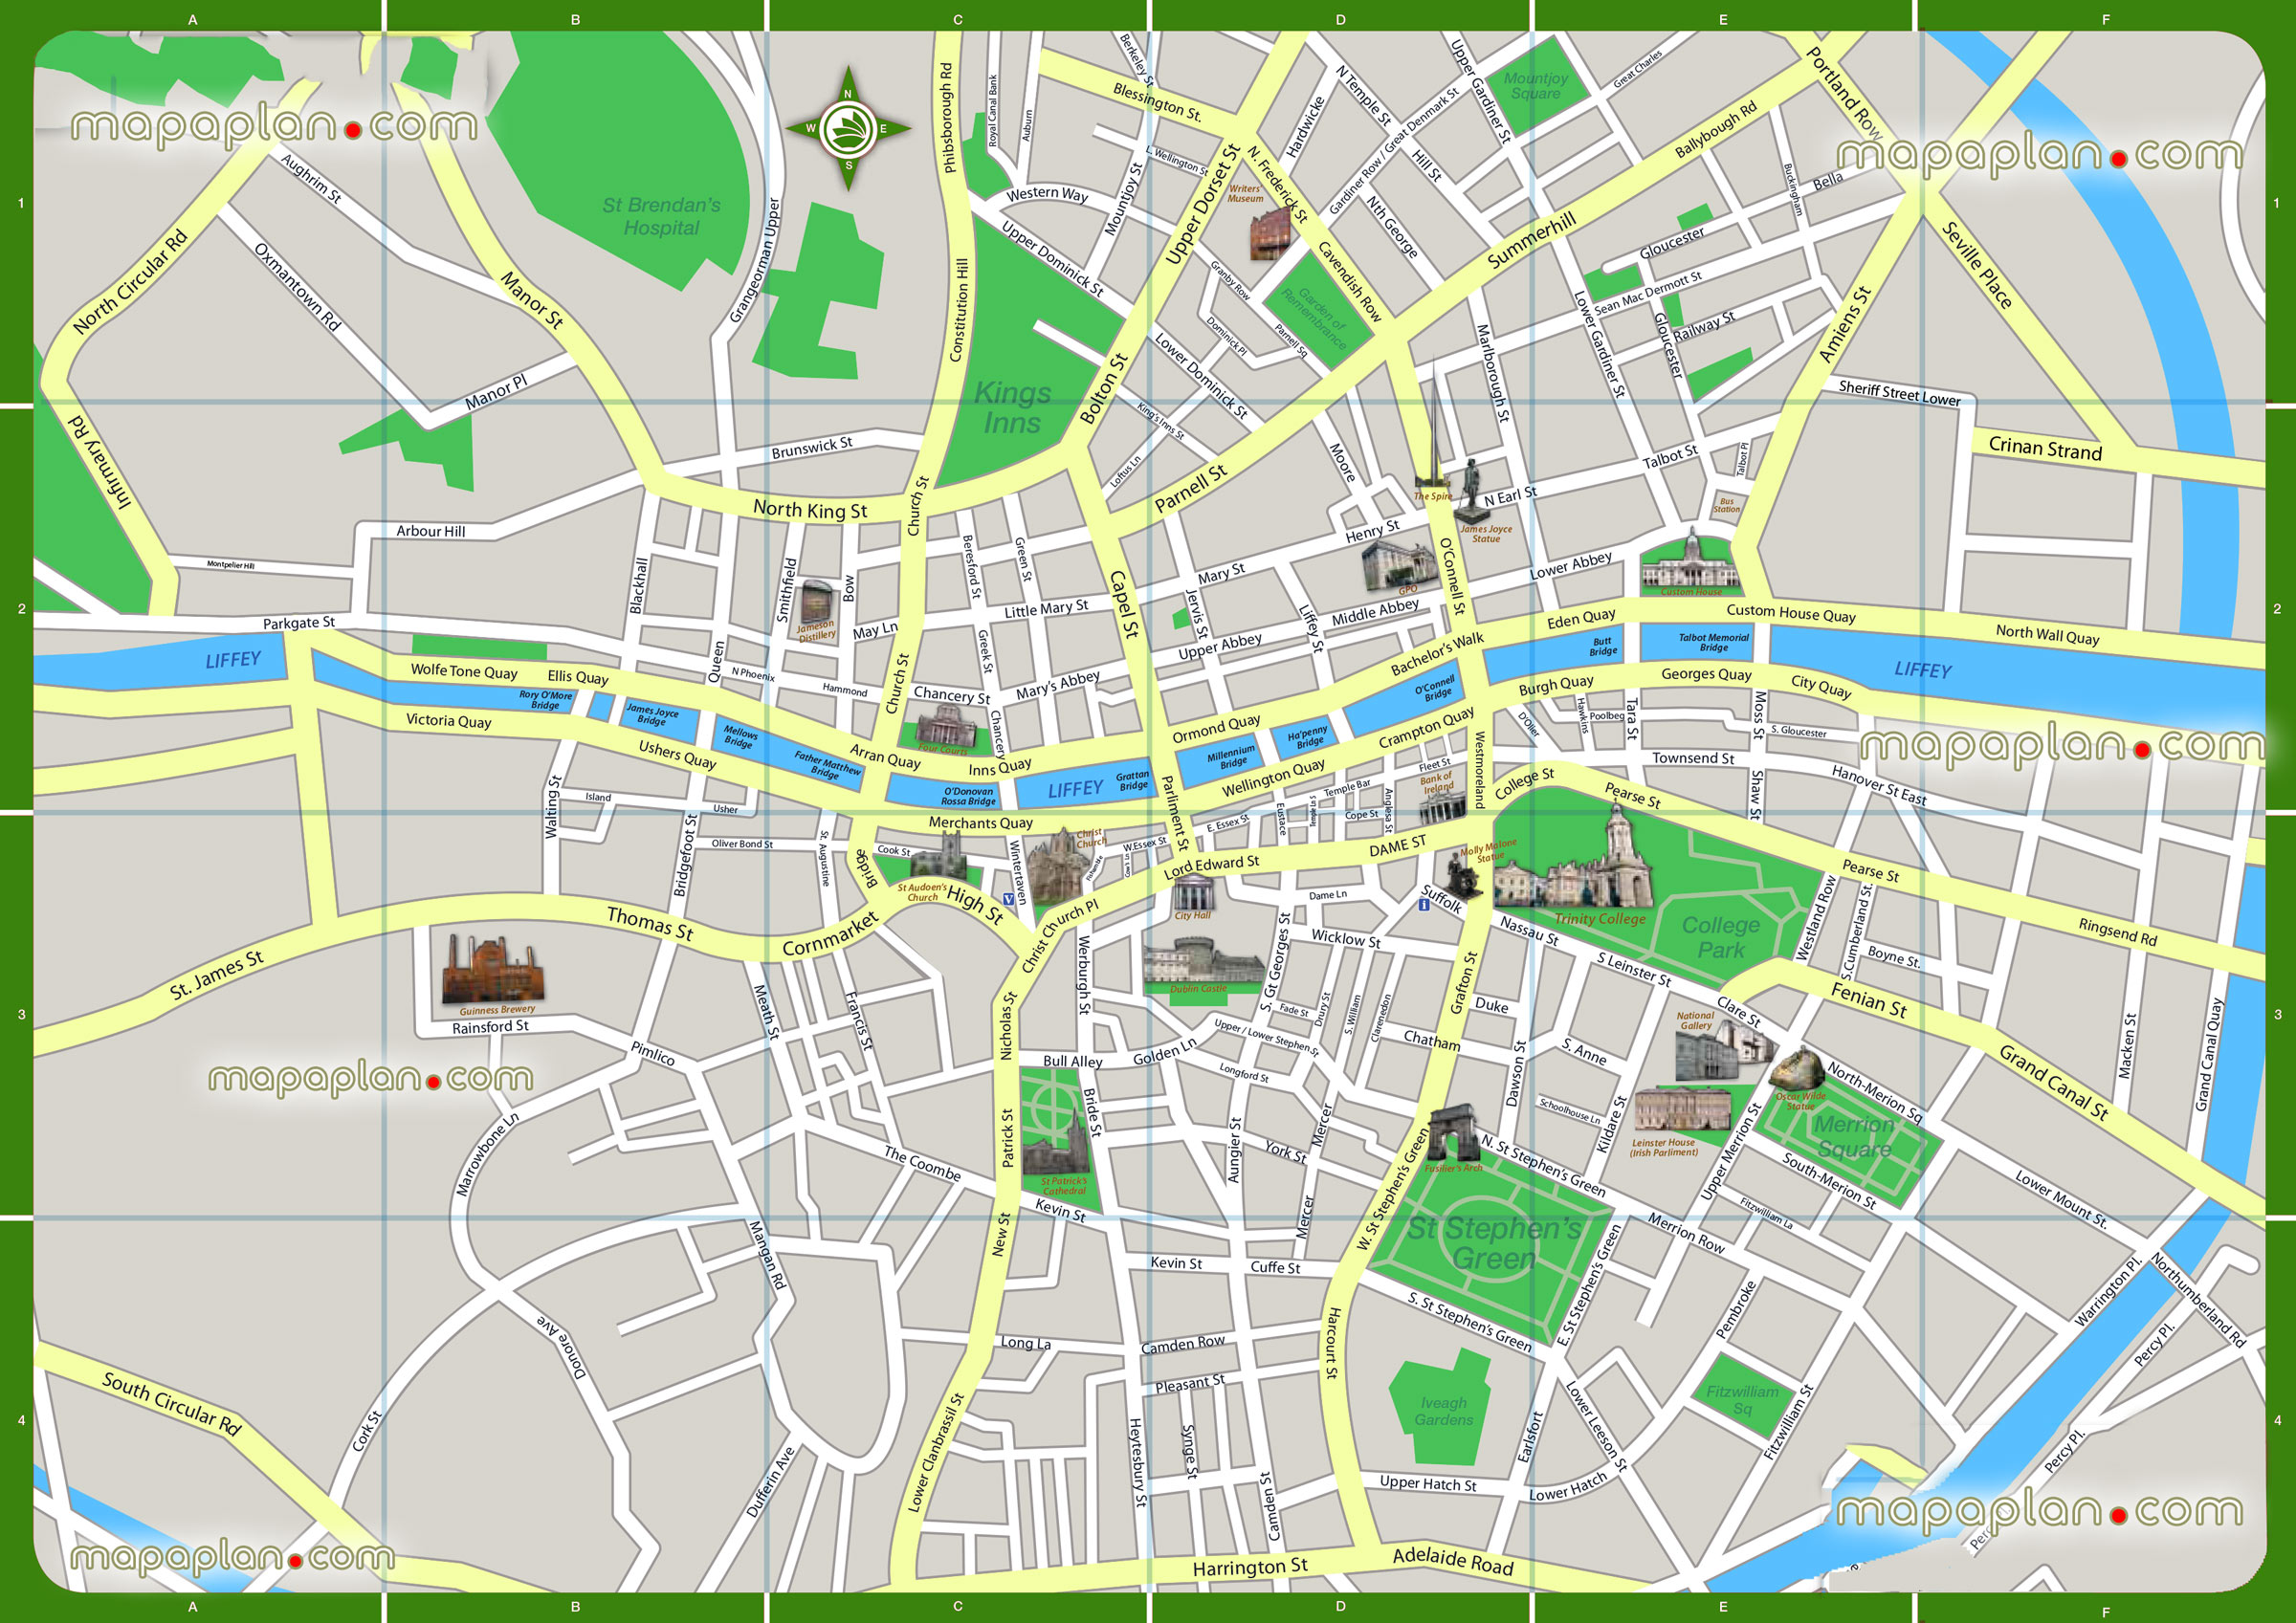 printable walking favourite points interest visit tourists old town city centre great historic spots best must see sightss Dublin Top tourist attractions map